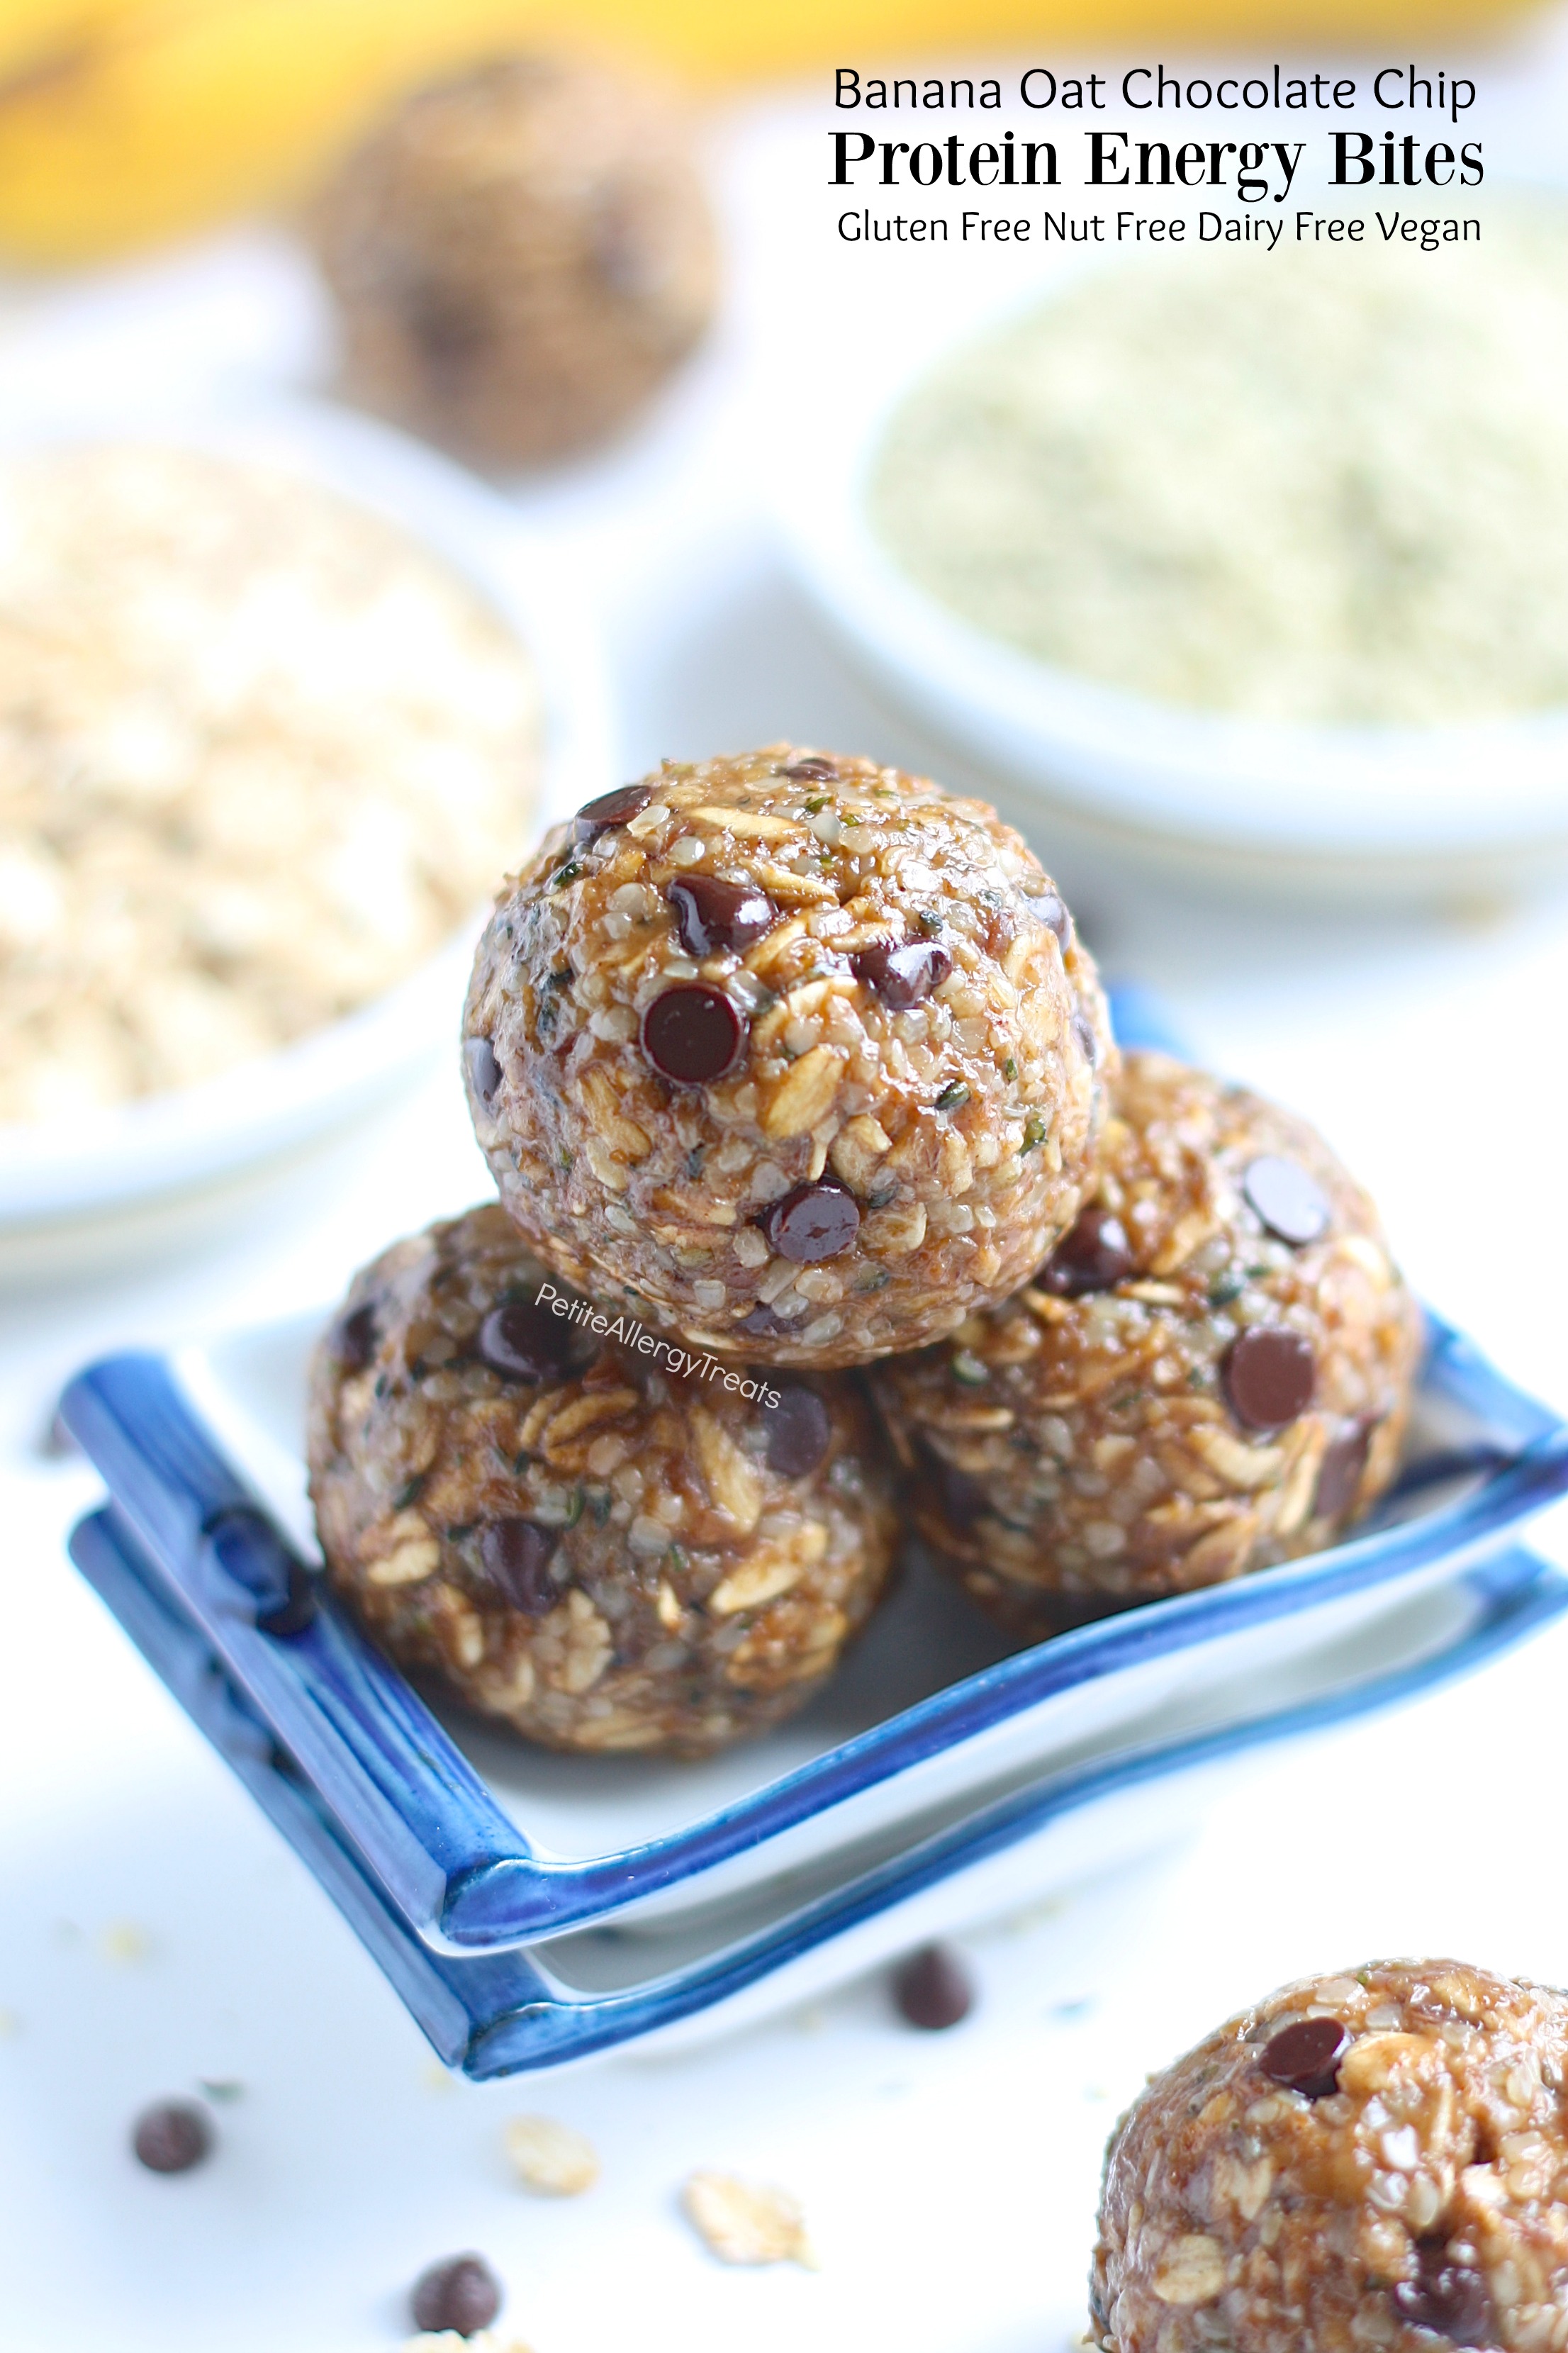 Protein Balls {With Oats and Chocolate Chips}